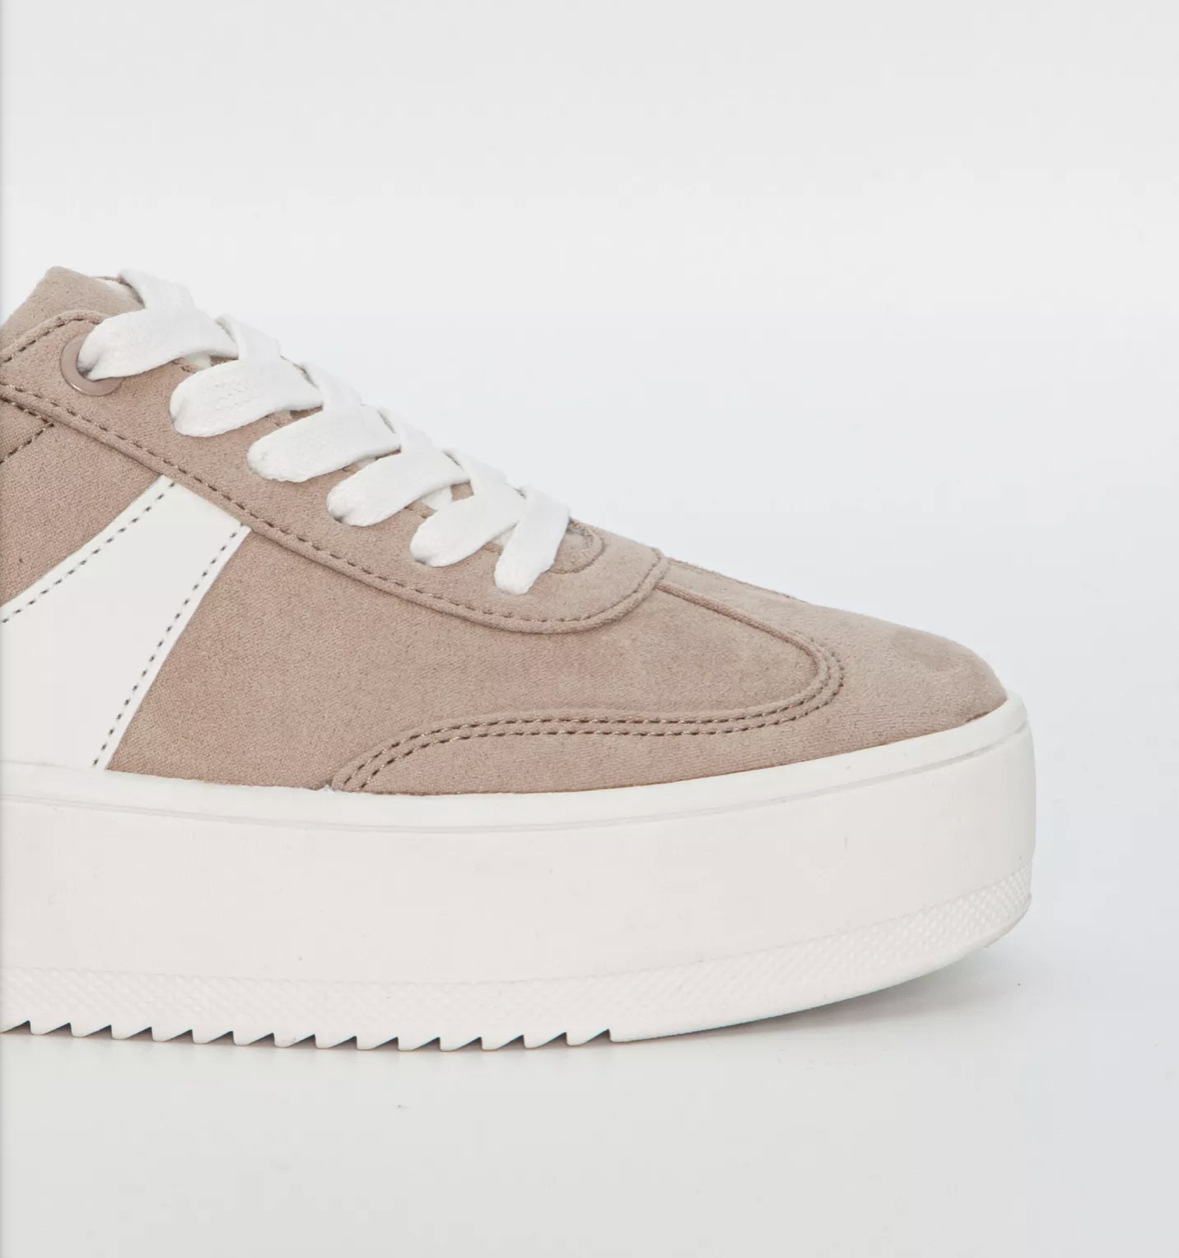 Enumerate abort søster Duffy Sneakers Beige Sand - Lilla Smultronstället